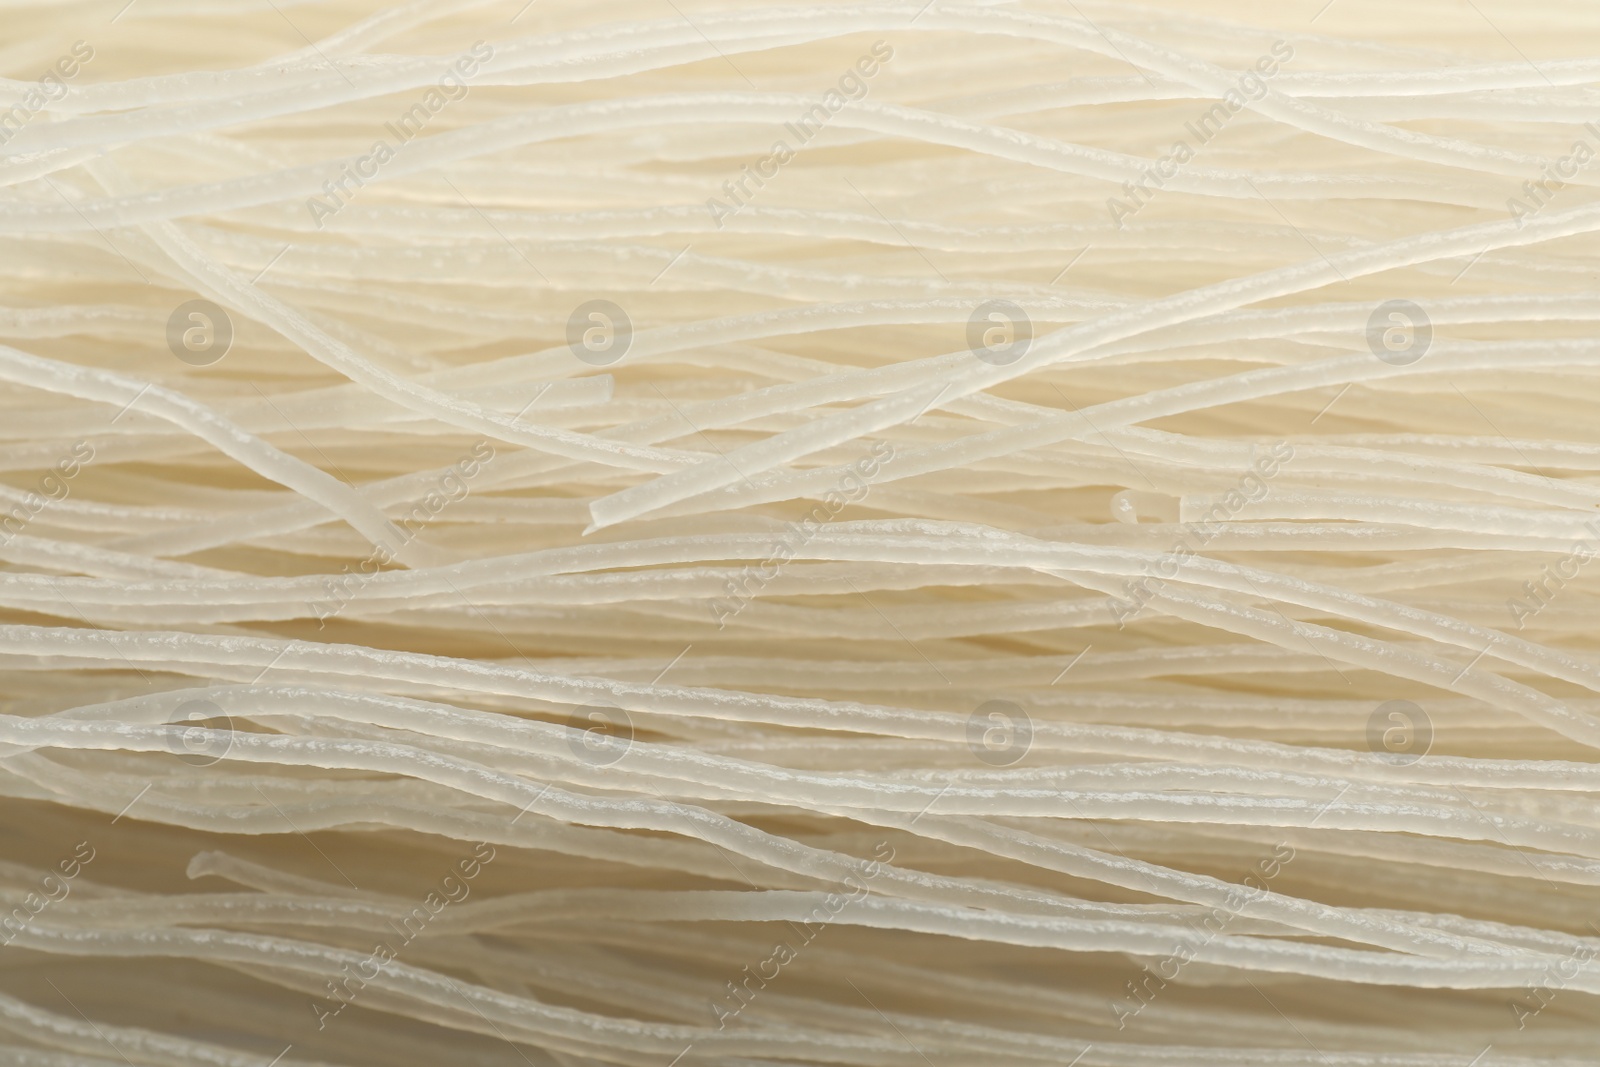 Photo of Closeup view of dried rice noodles as background